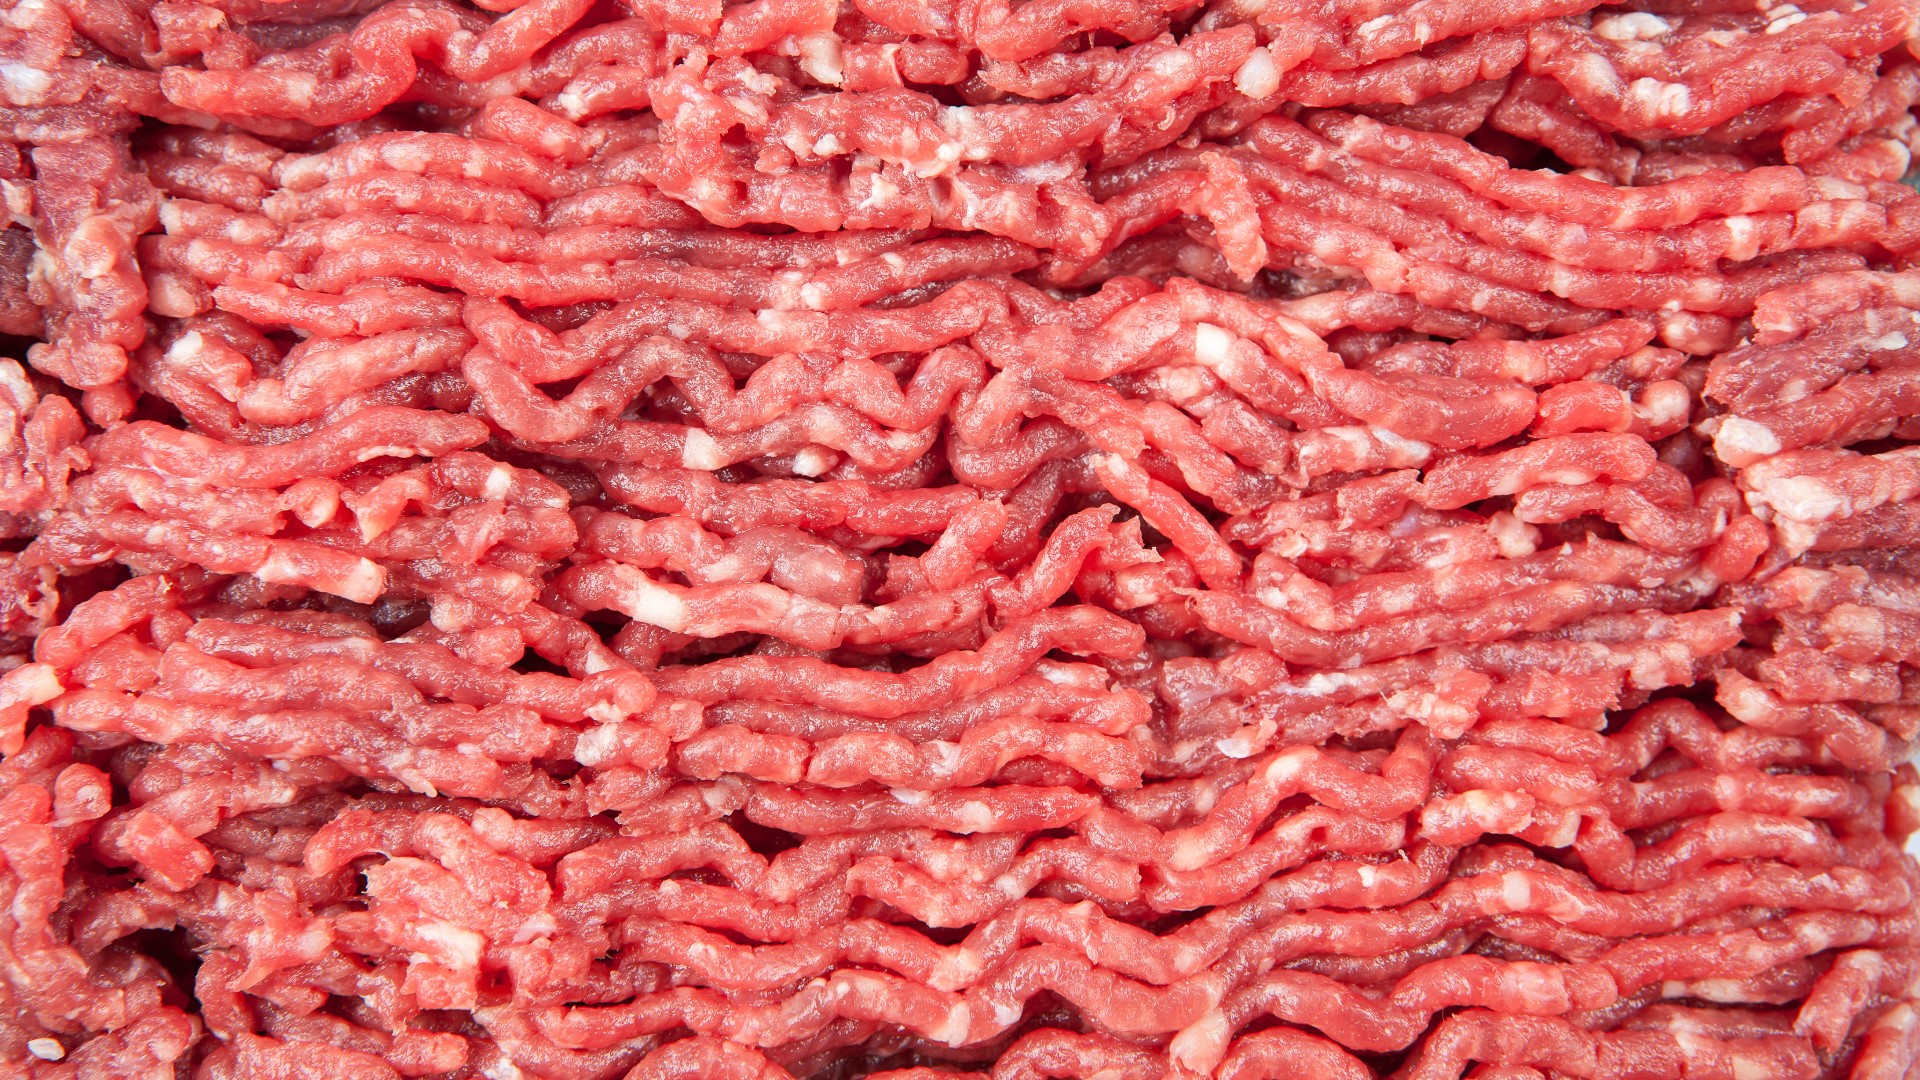 Customers who bought ground beef at the Brentwood Schnucks on Feb. 25 are urged not to eat it. It's at least the 11th beef recall Schnucks announced since 2020.